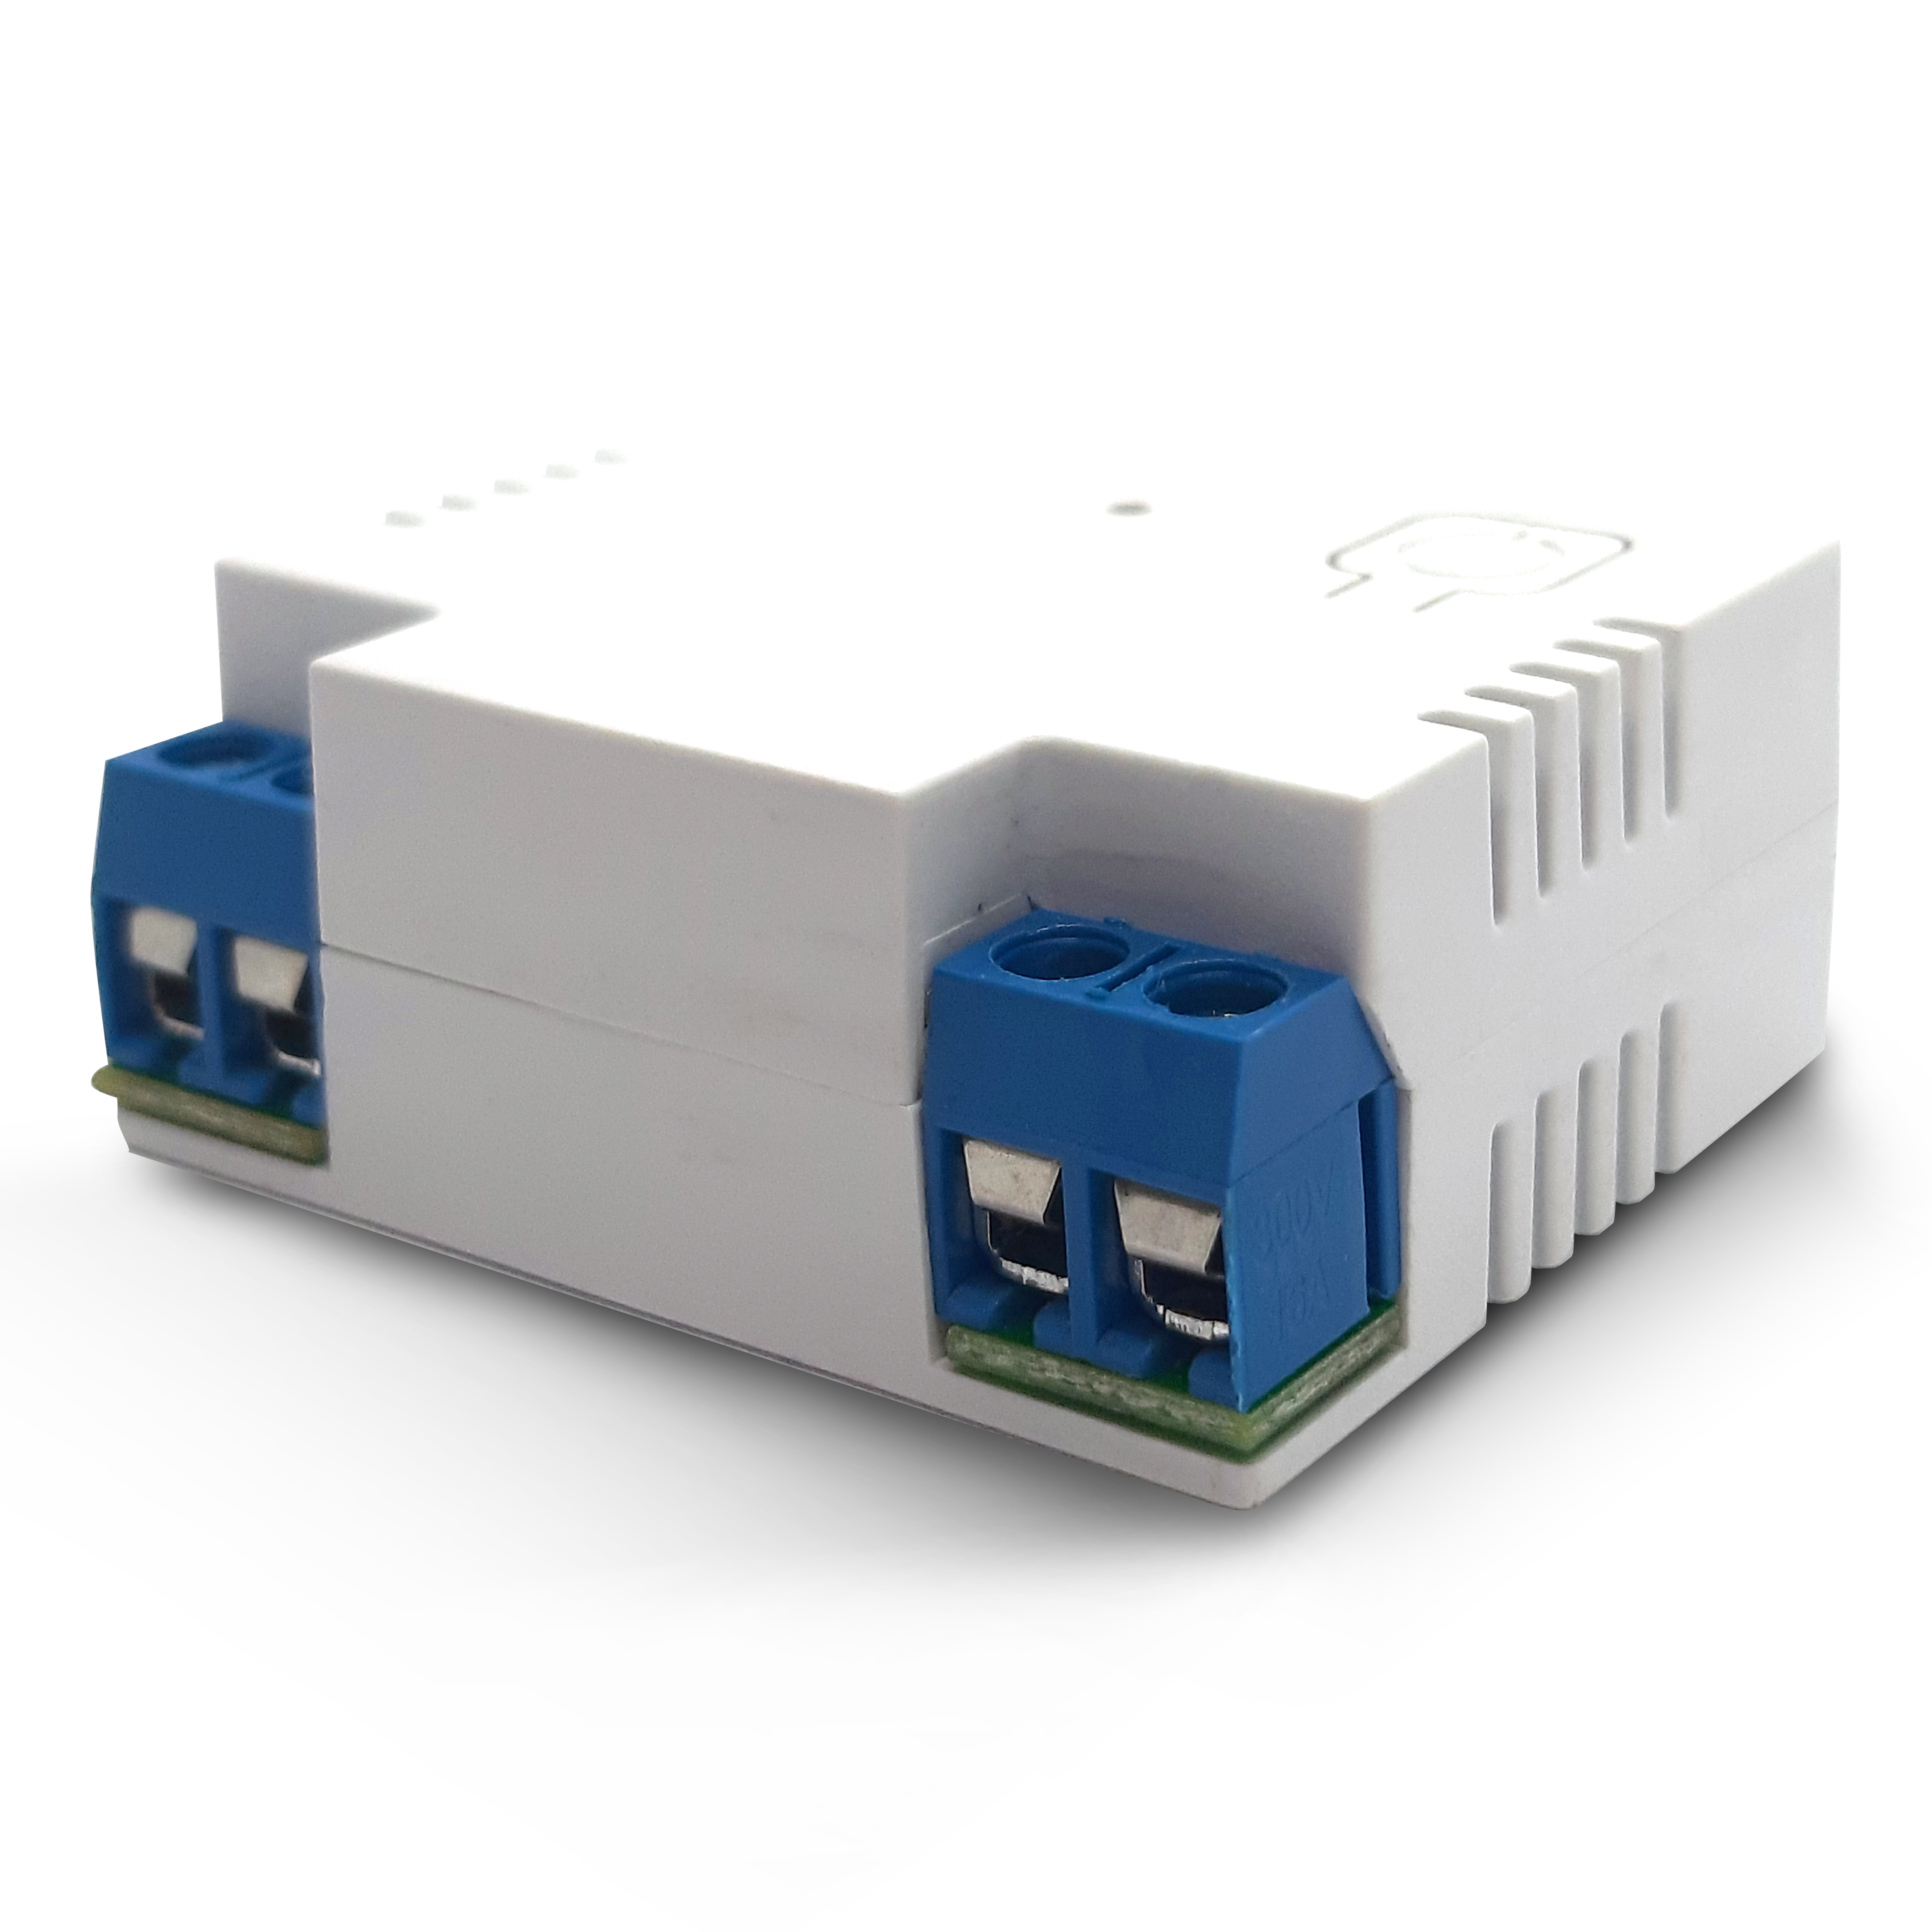 U-Prox Relay DC -  Wireless low-current relay for home automation. Powered by 12V DC